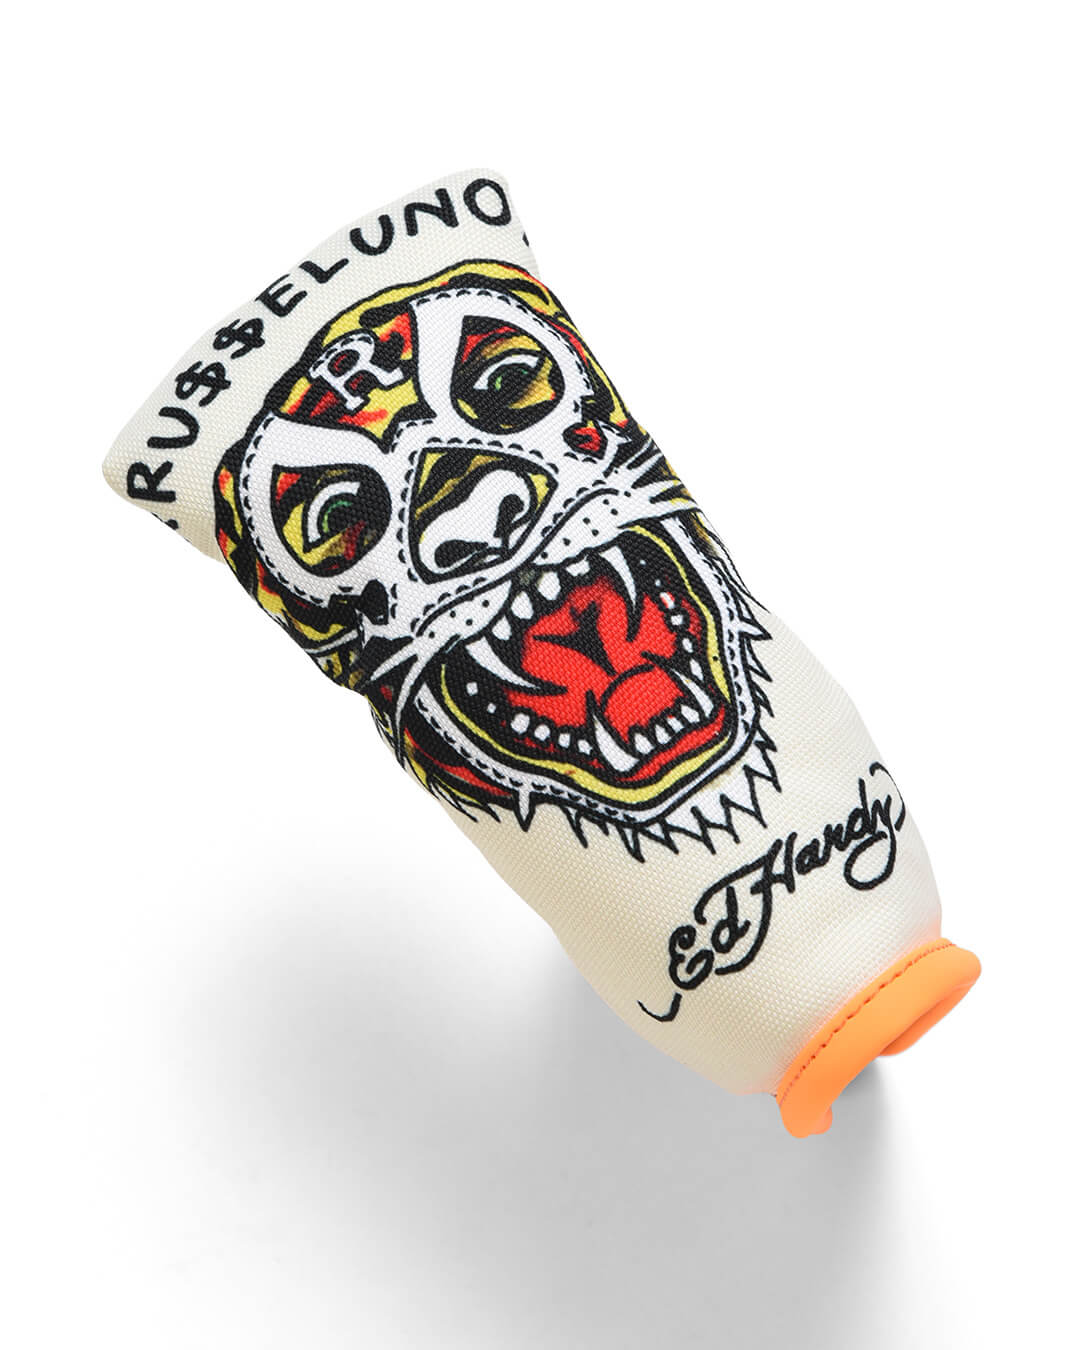 SKELETON PUTTER COVER PING